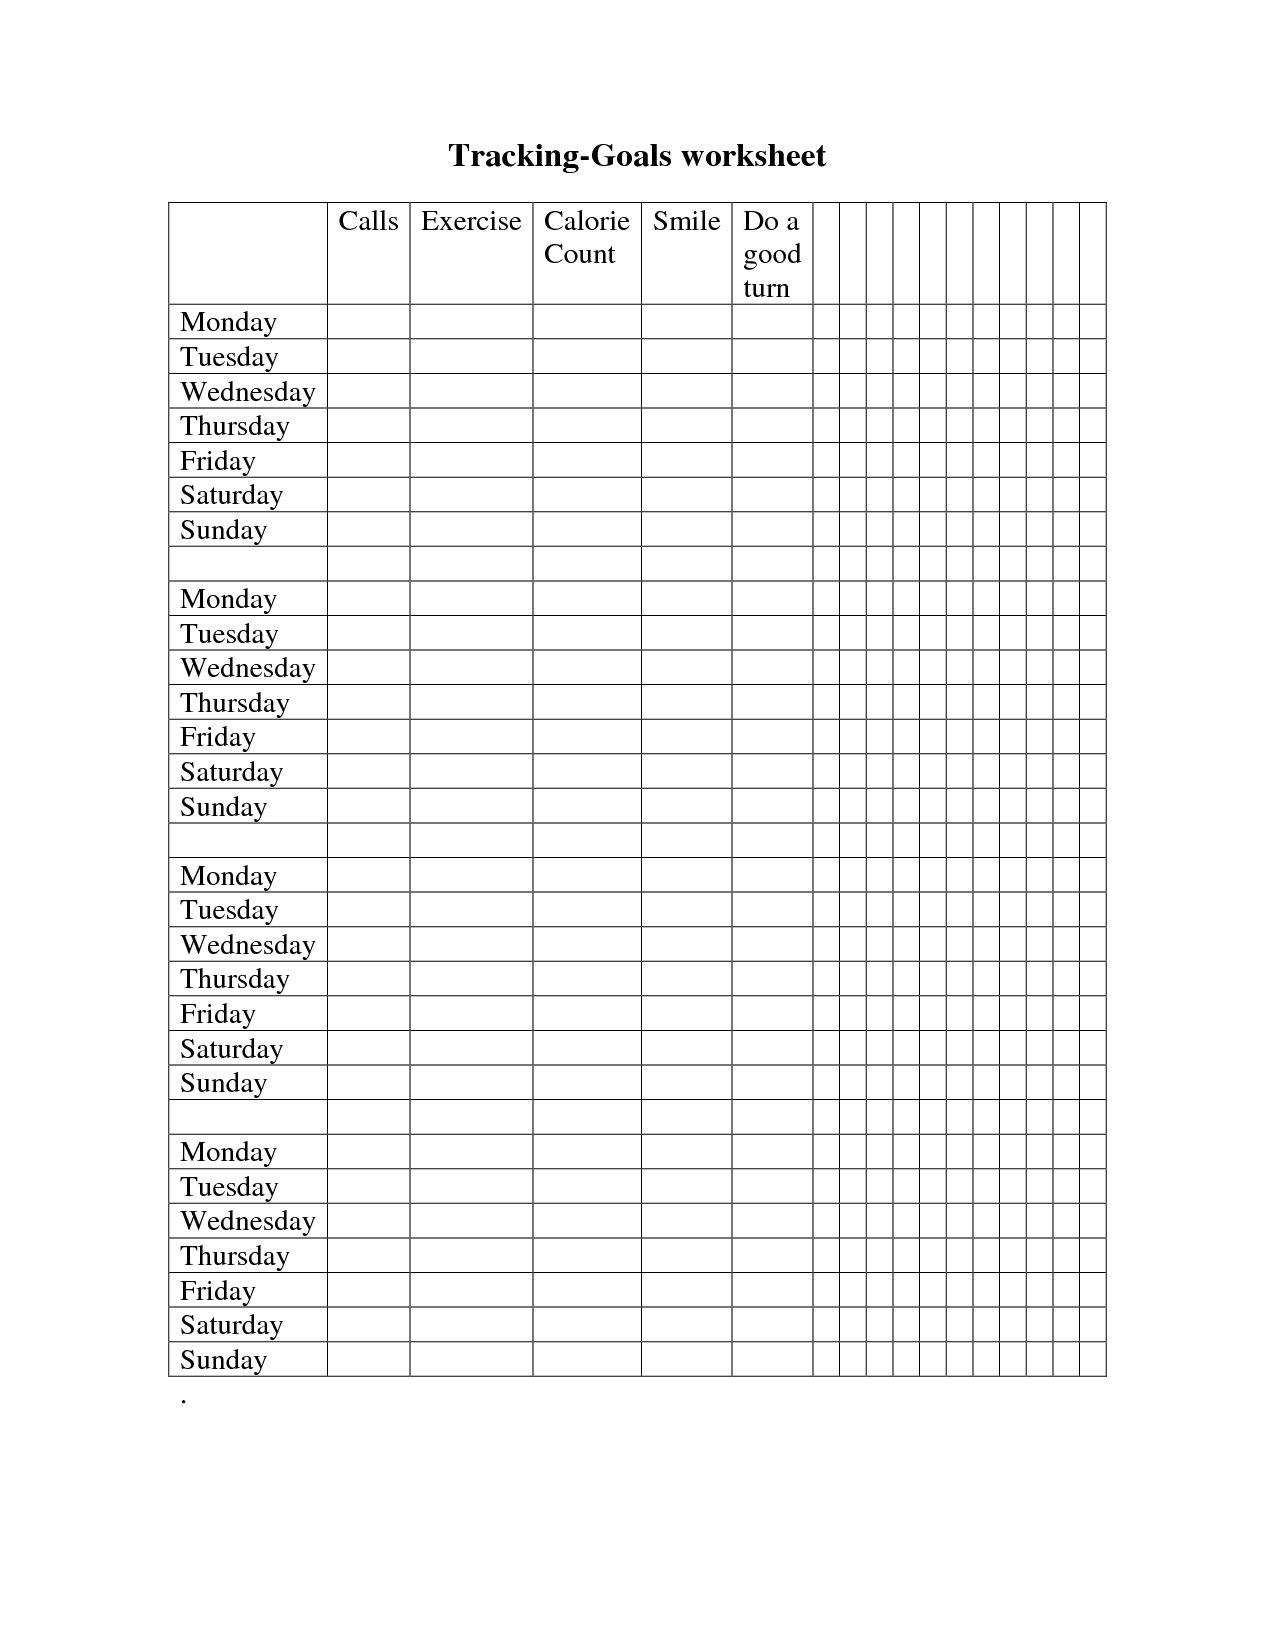 18 Best Images of Food Tracking Worksheet - Journal Food Diary Template